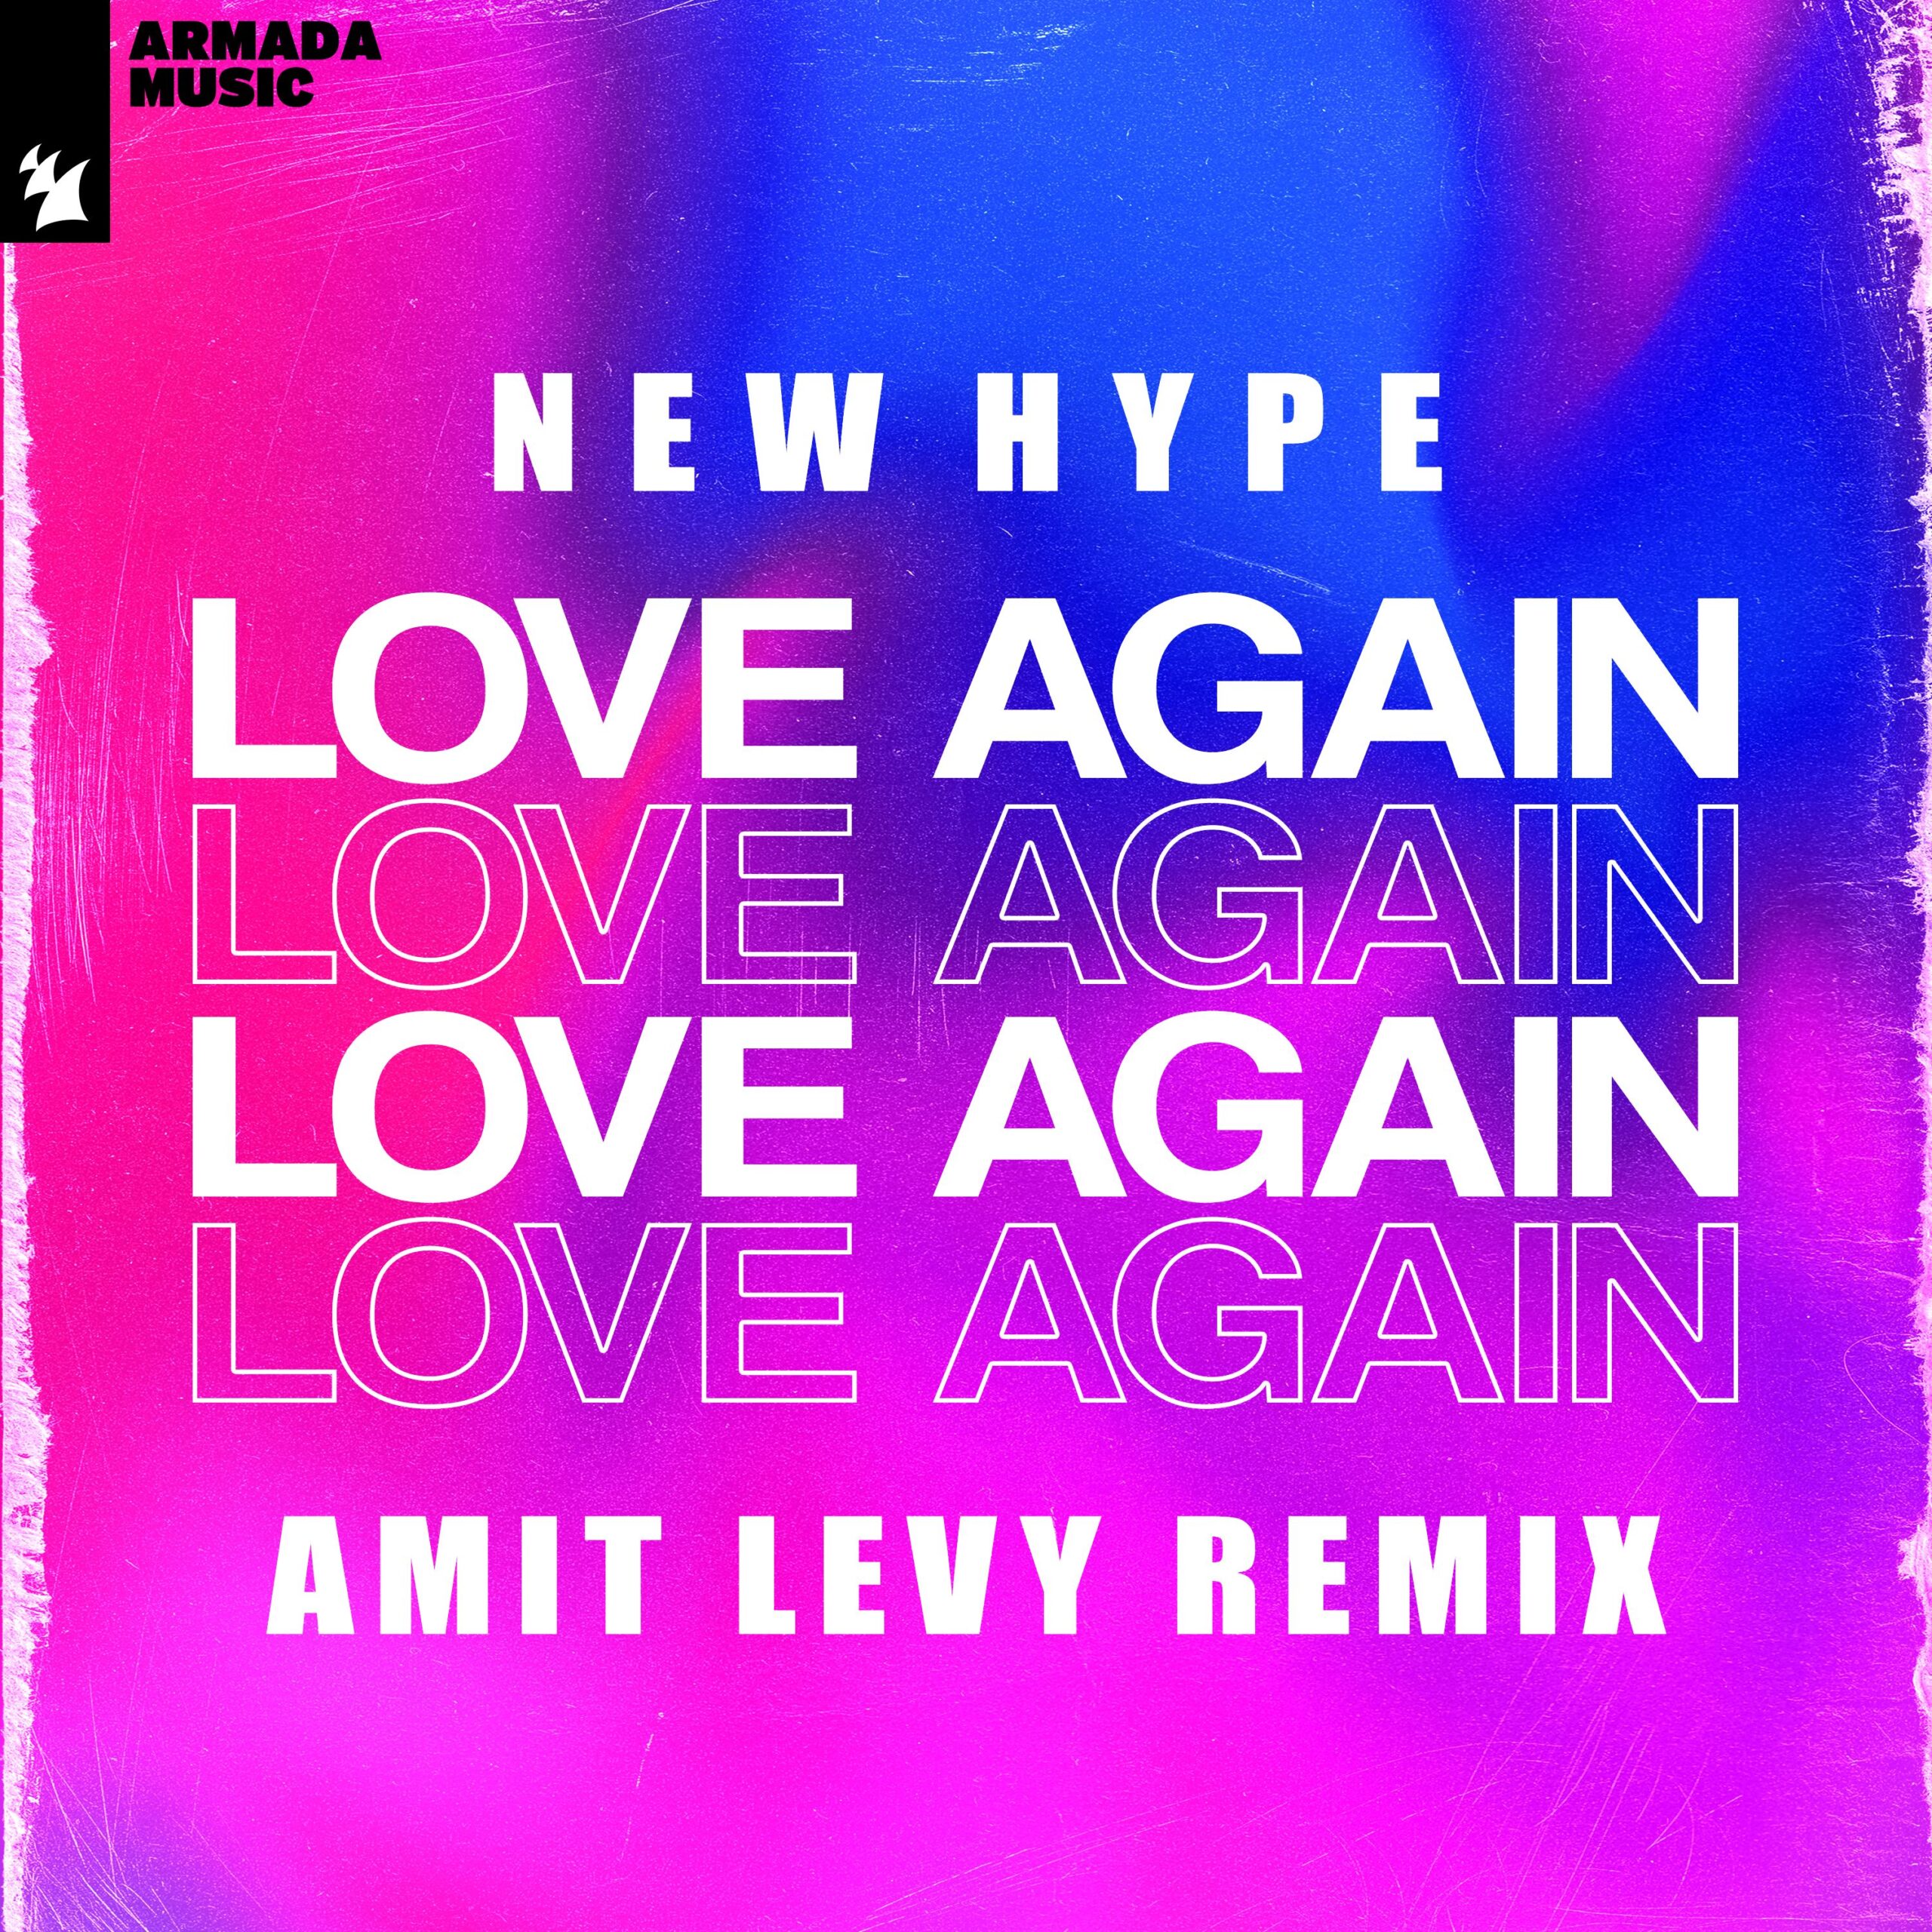 New Hype presents Love Again (Amit Levy Remix) on Armada Music